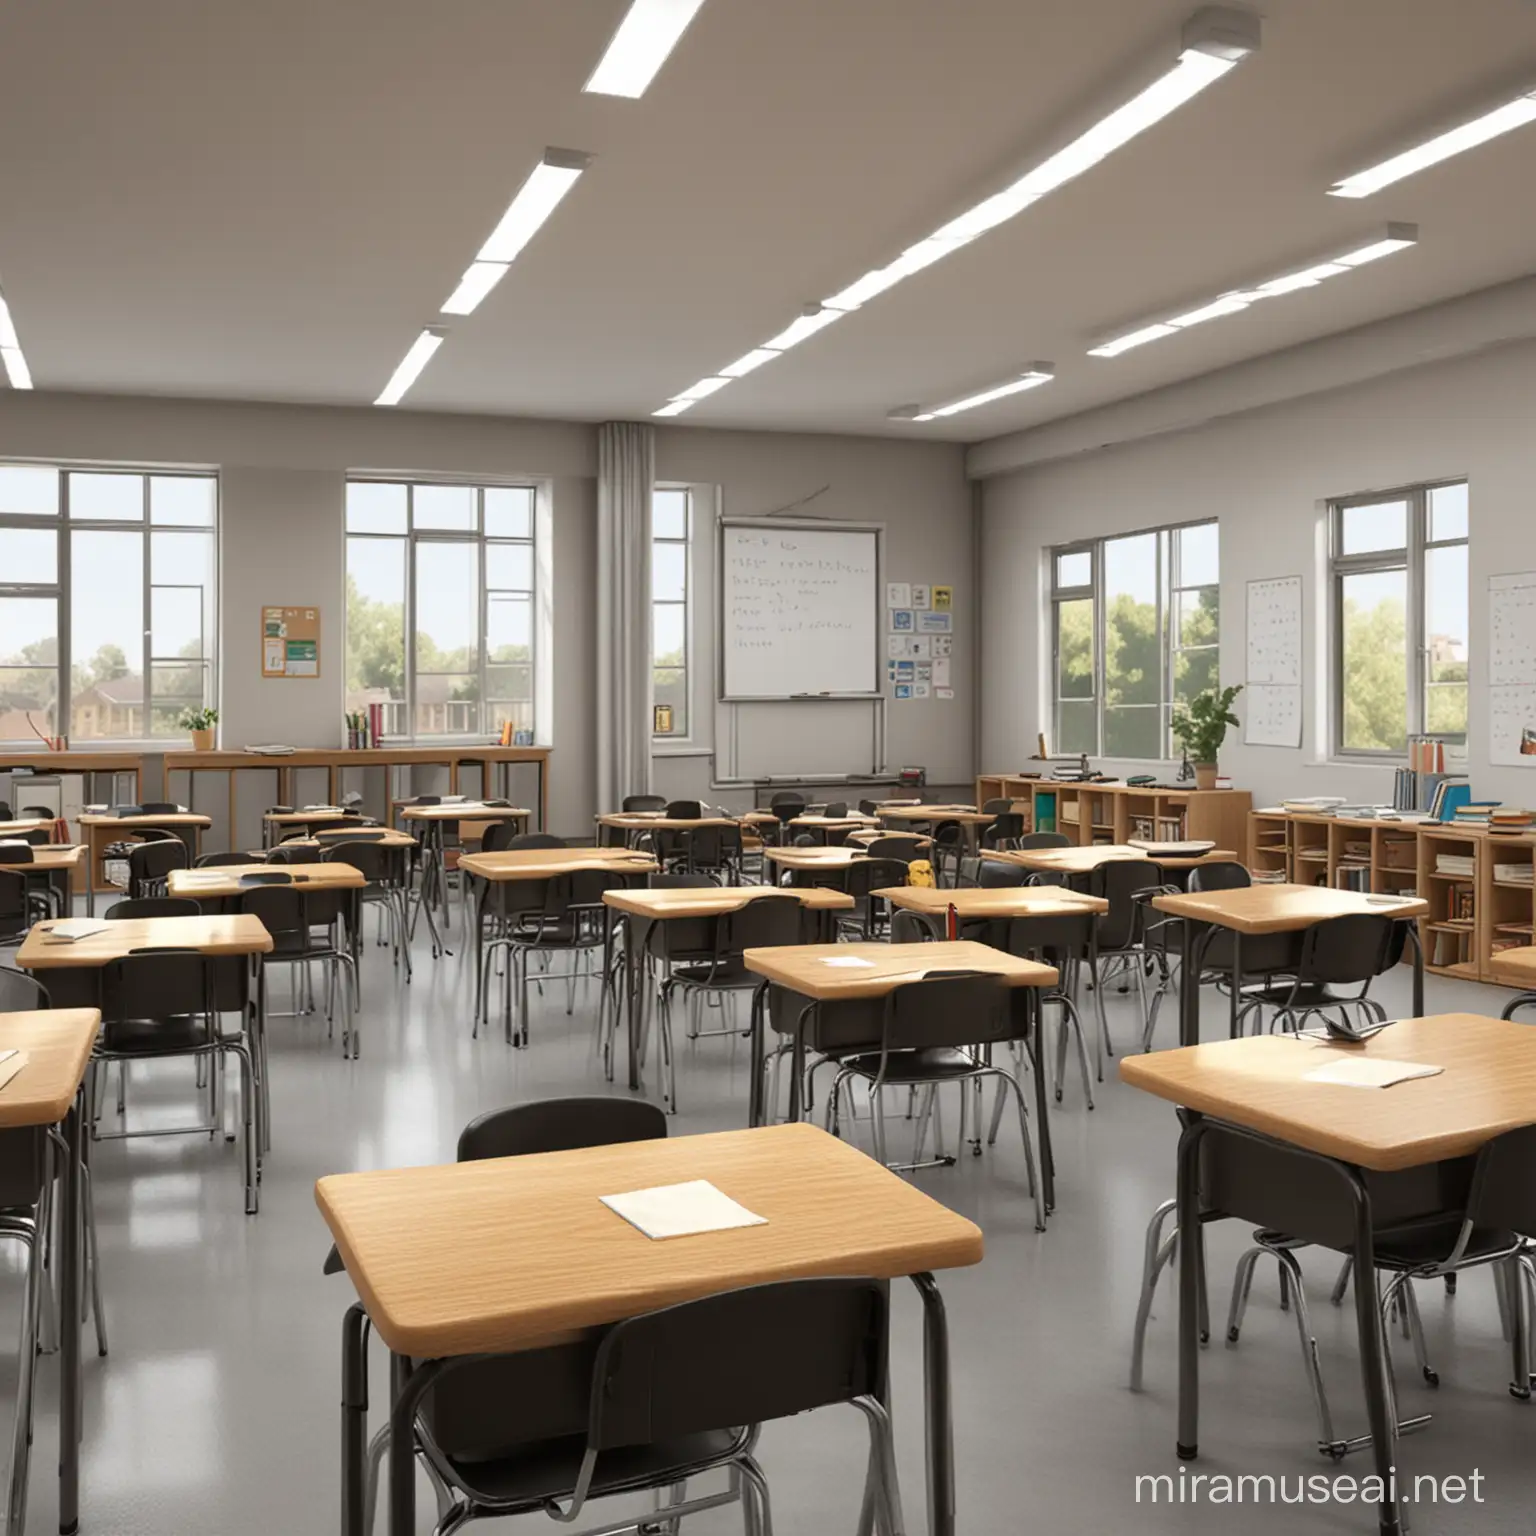 Realistic School Setting with Students and Teacher in Classroom